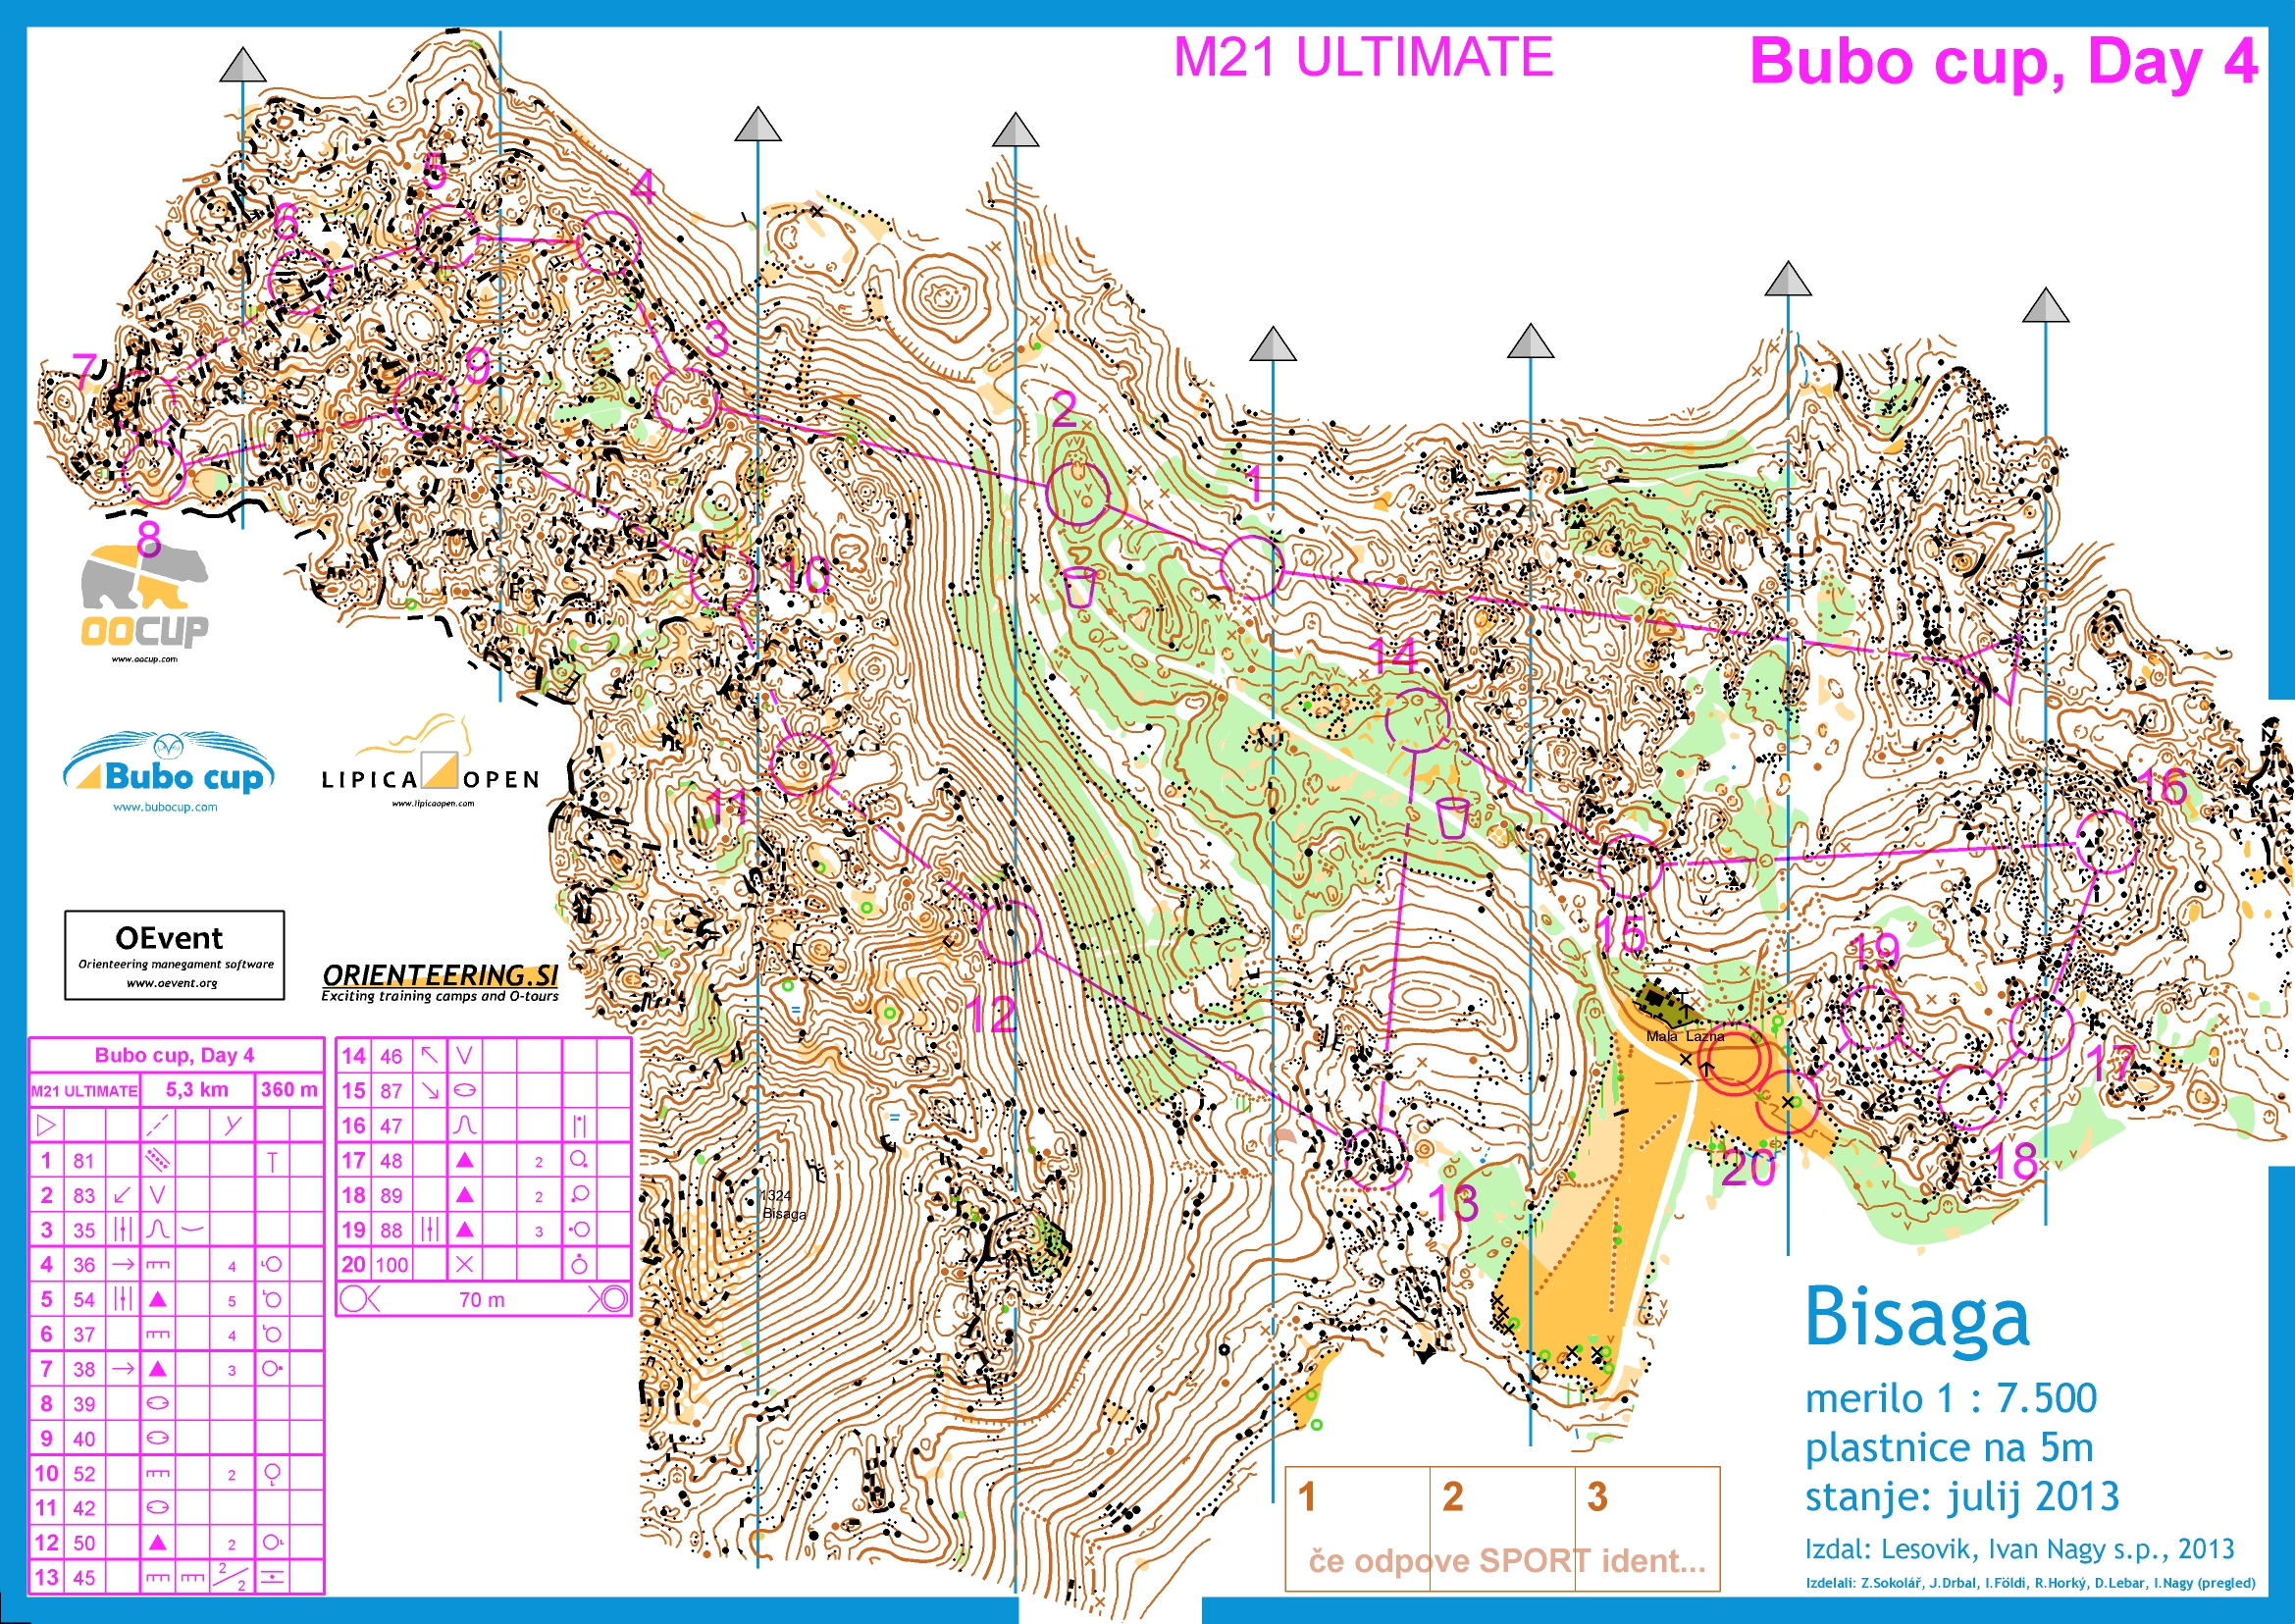 Bubo cup, Stage 4 M21 ULTIMATE (2013-07-19)